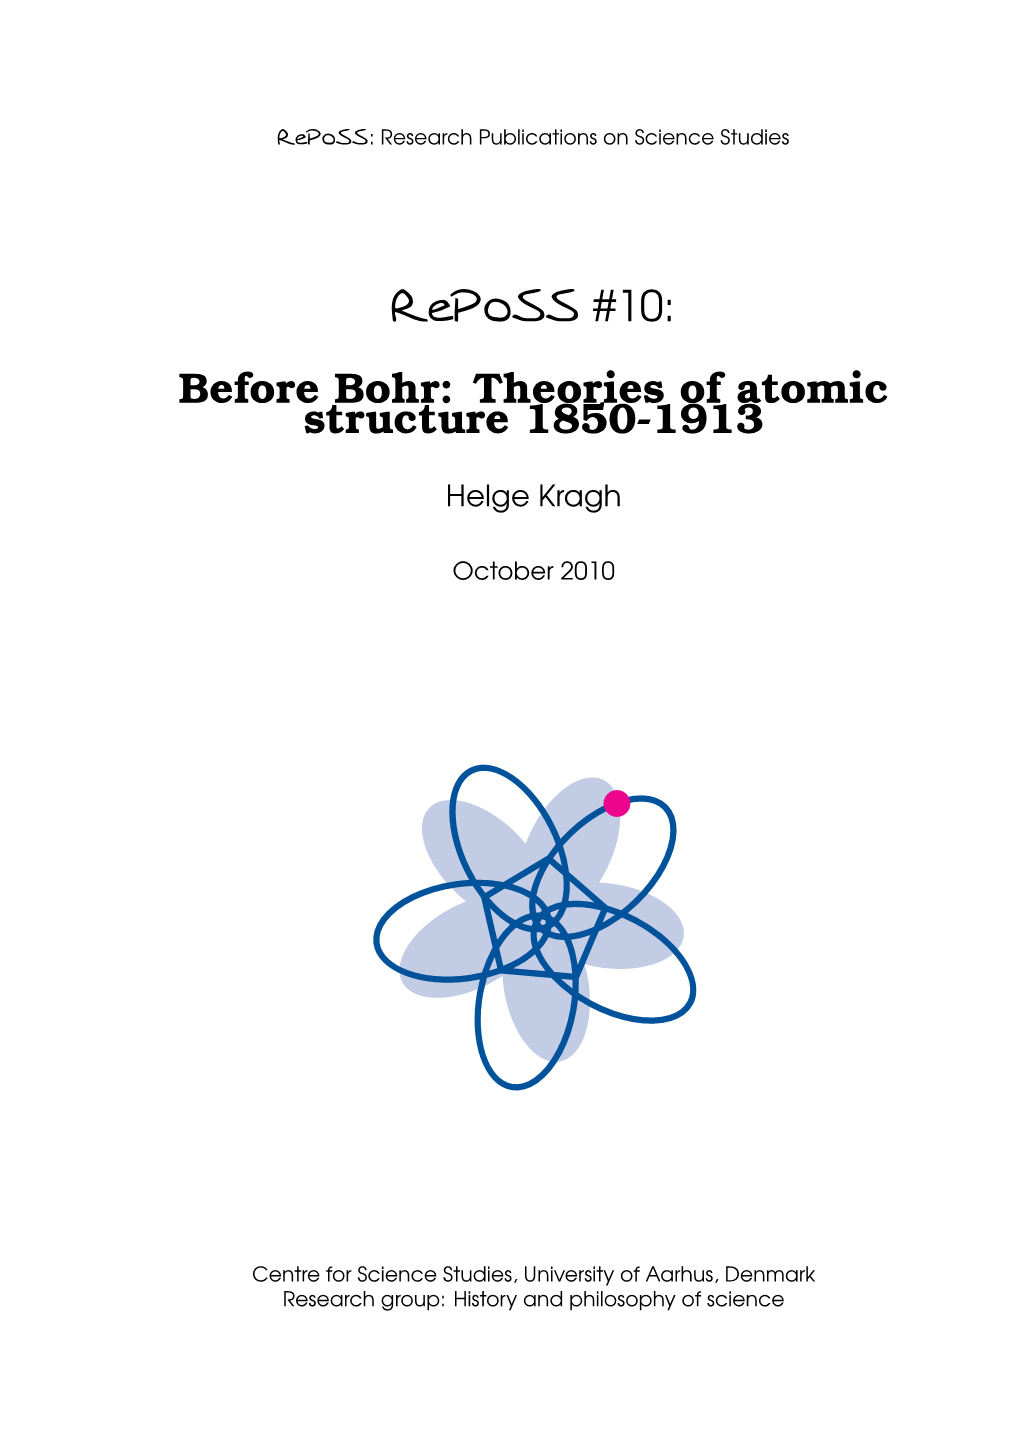 Reposs #10: Before Bohr: Theories of Atomic Structure 1850-1913